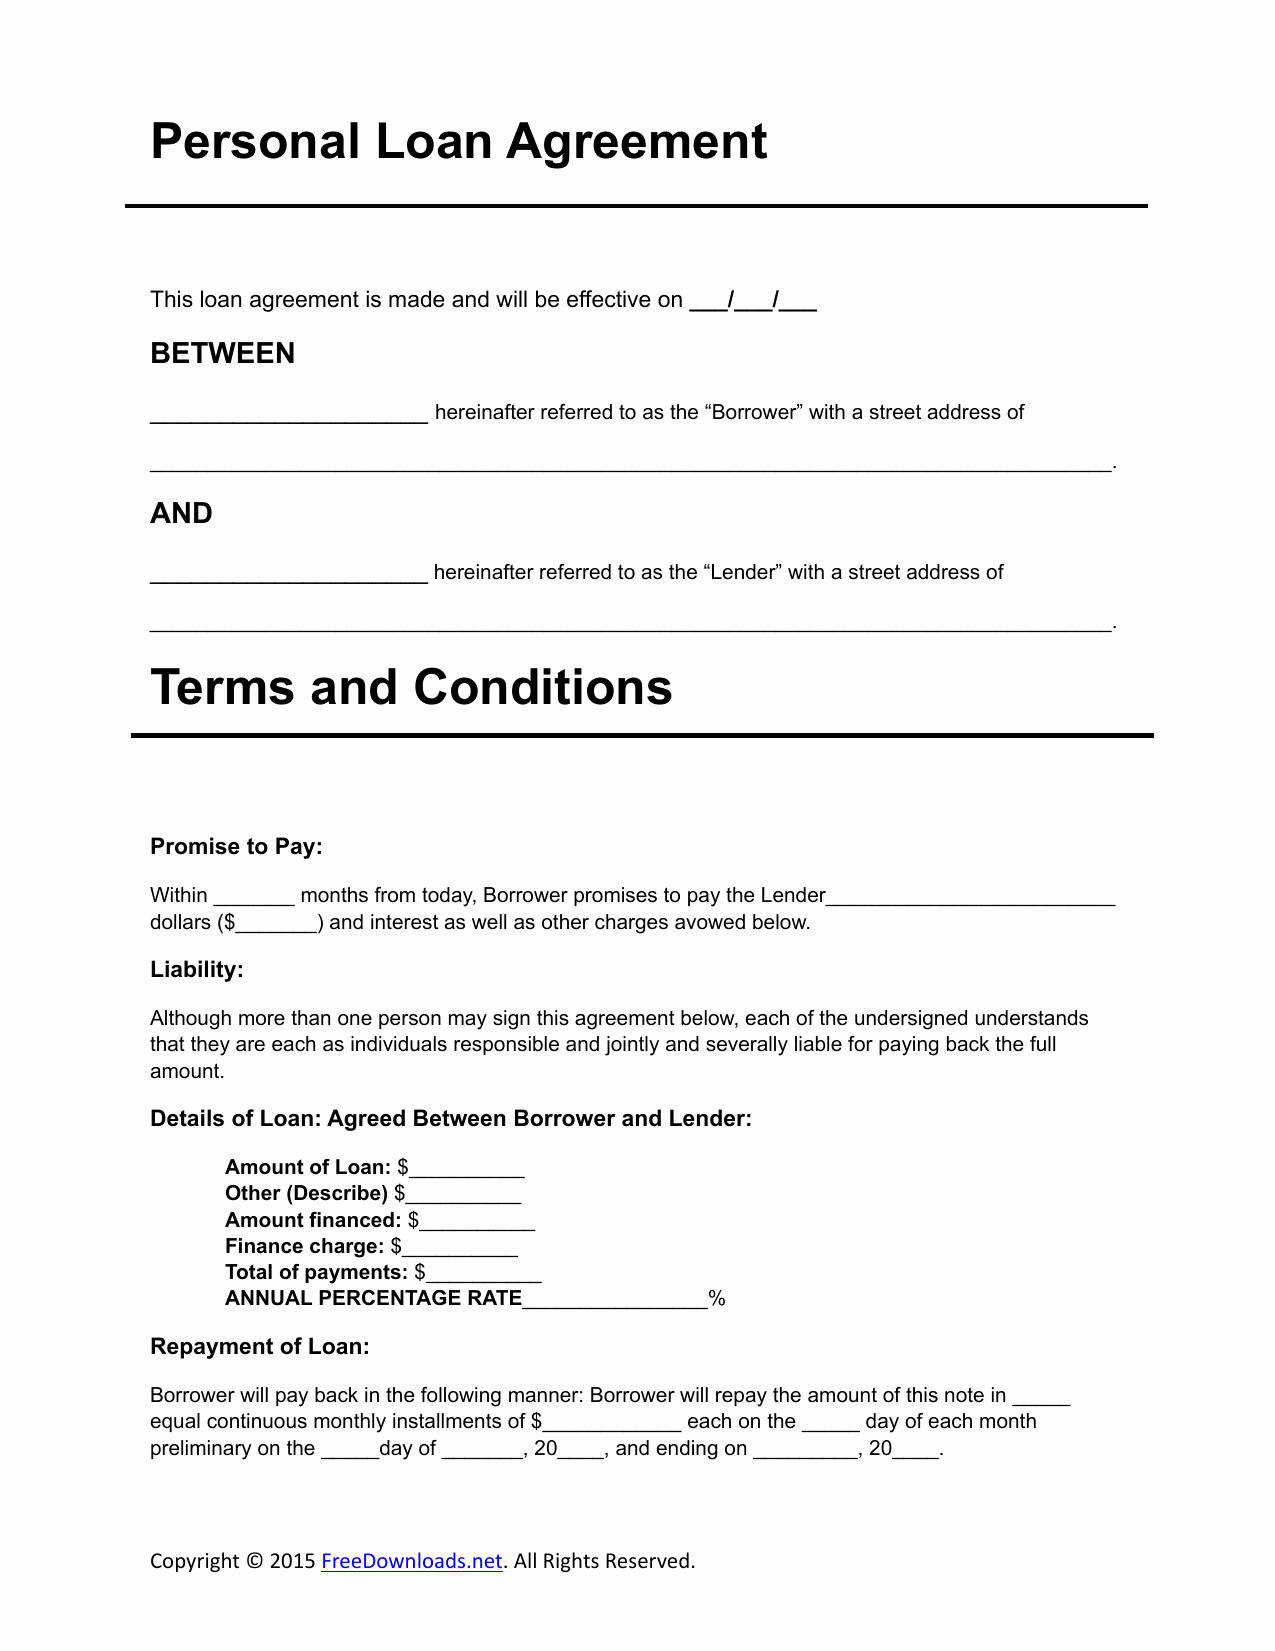 Personal Loan Agreement Template Awesome Download Personal Loan Agreement Template Pdf